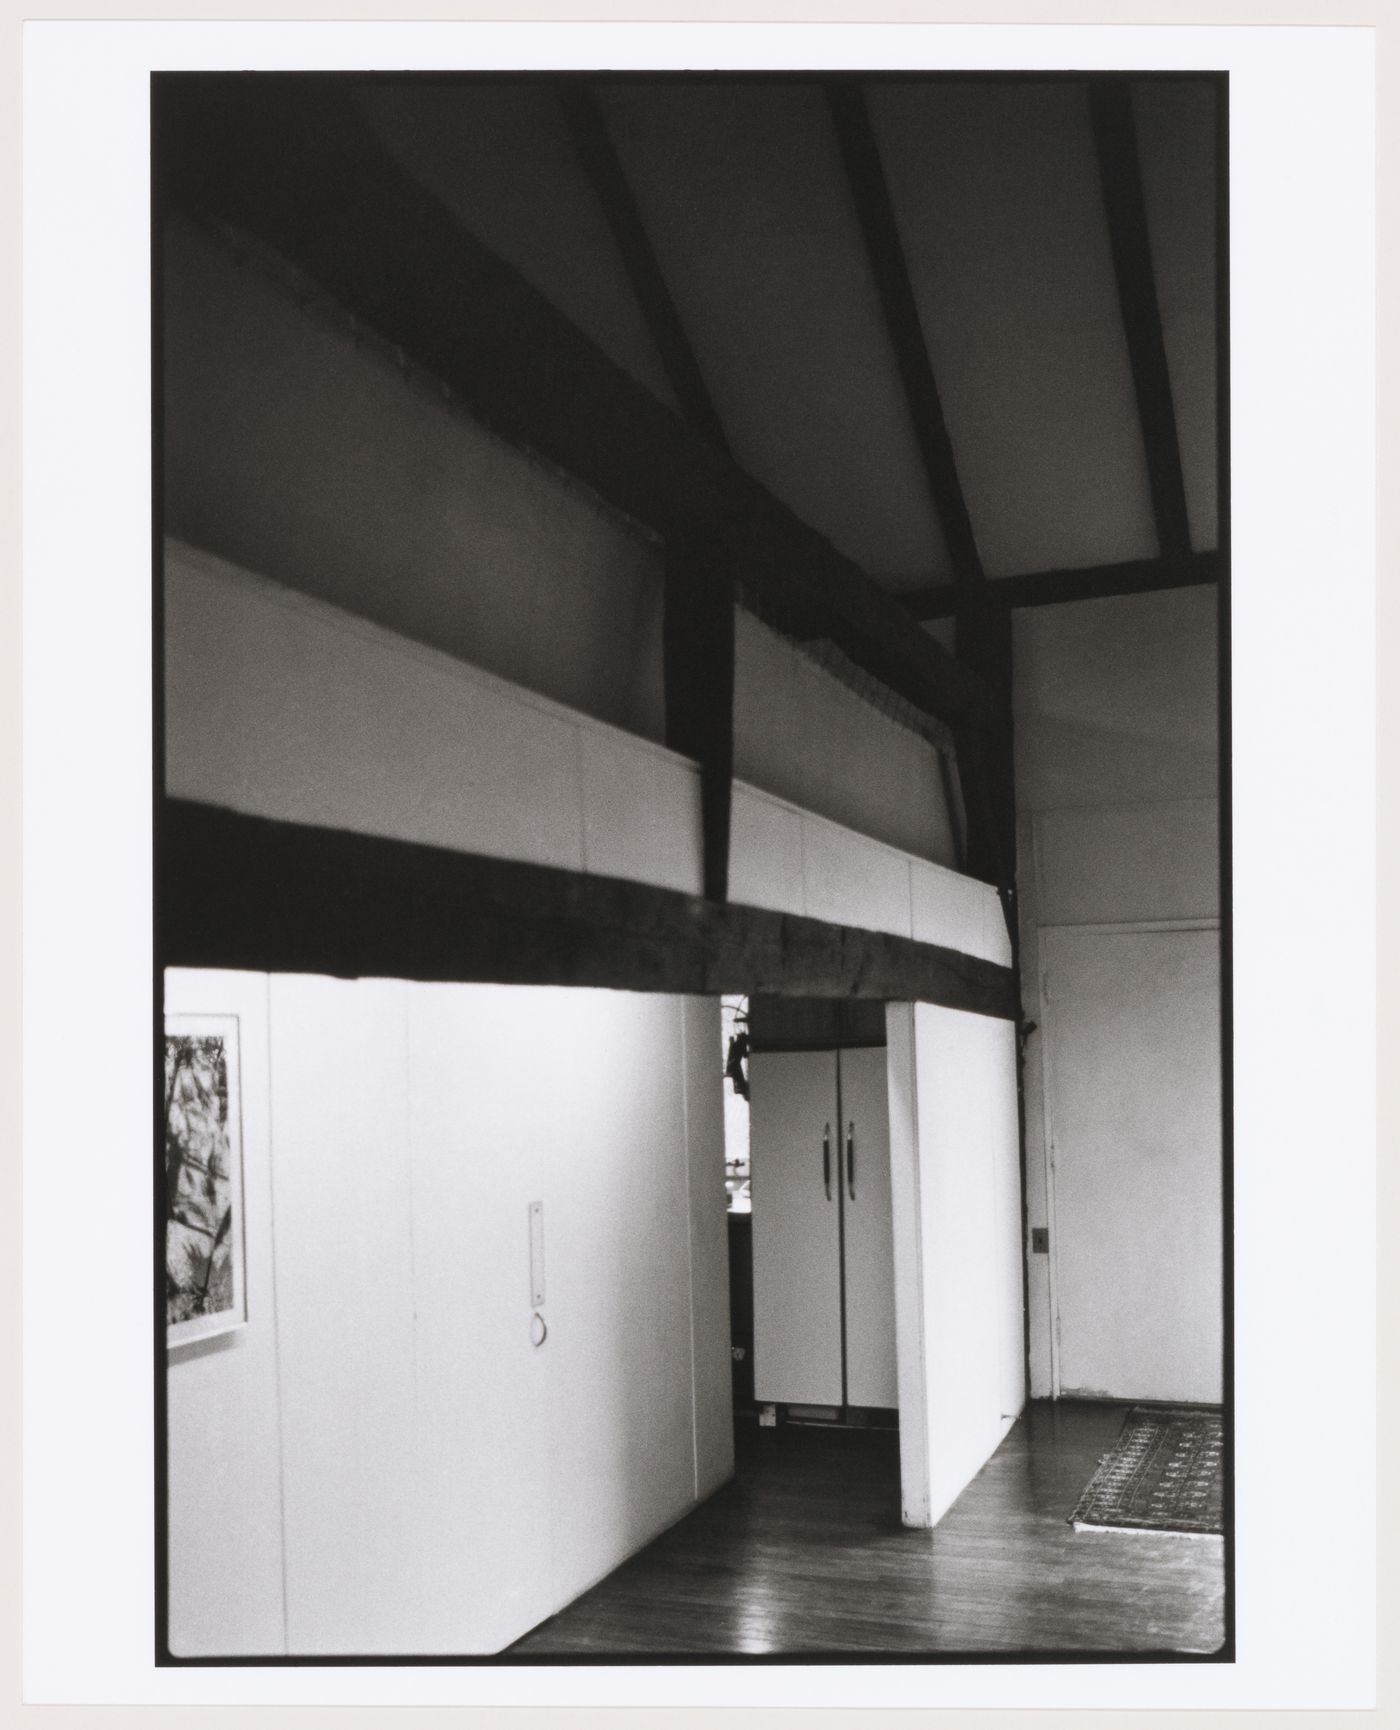 Interior view of Mary Callery Barn with doors and partitions, Huntington, Long Island, New York, United States